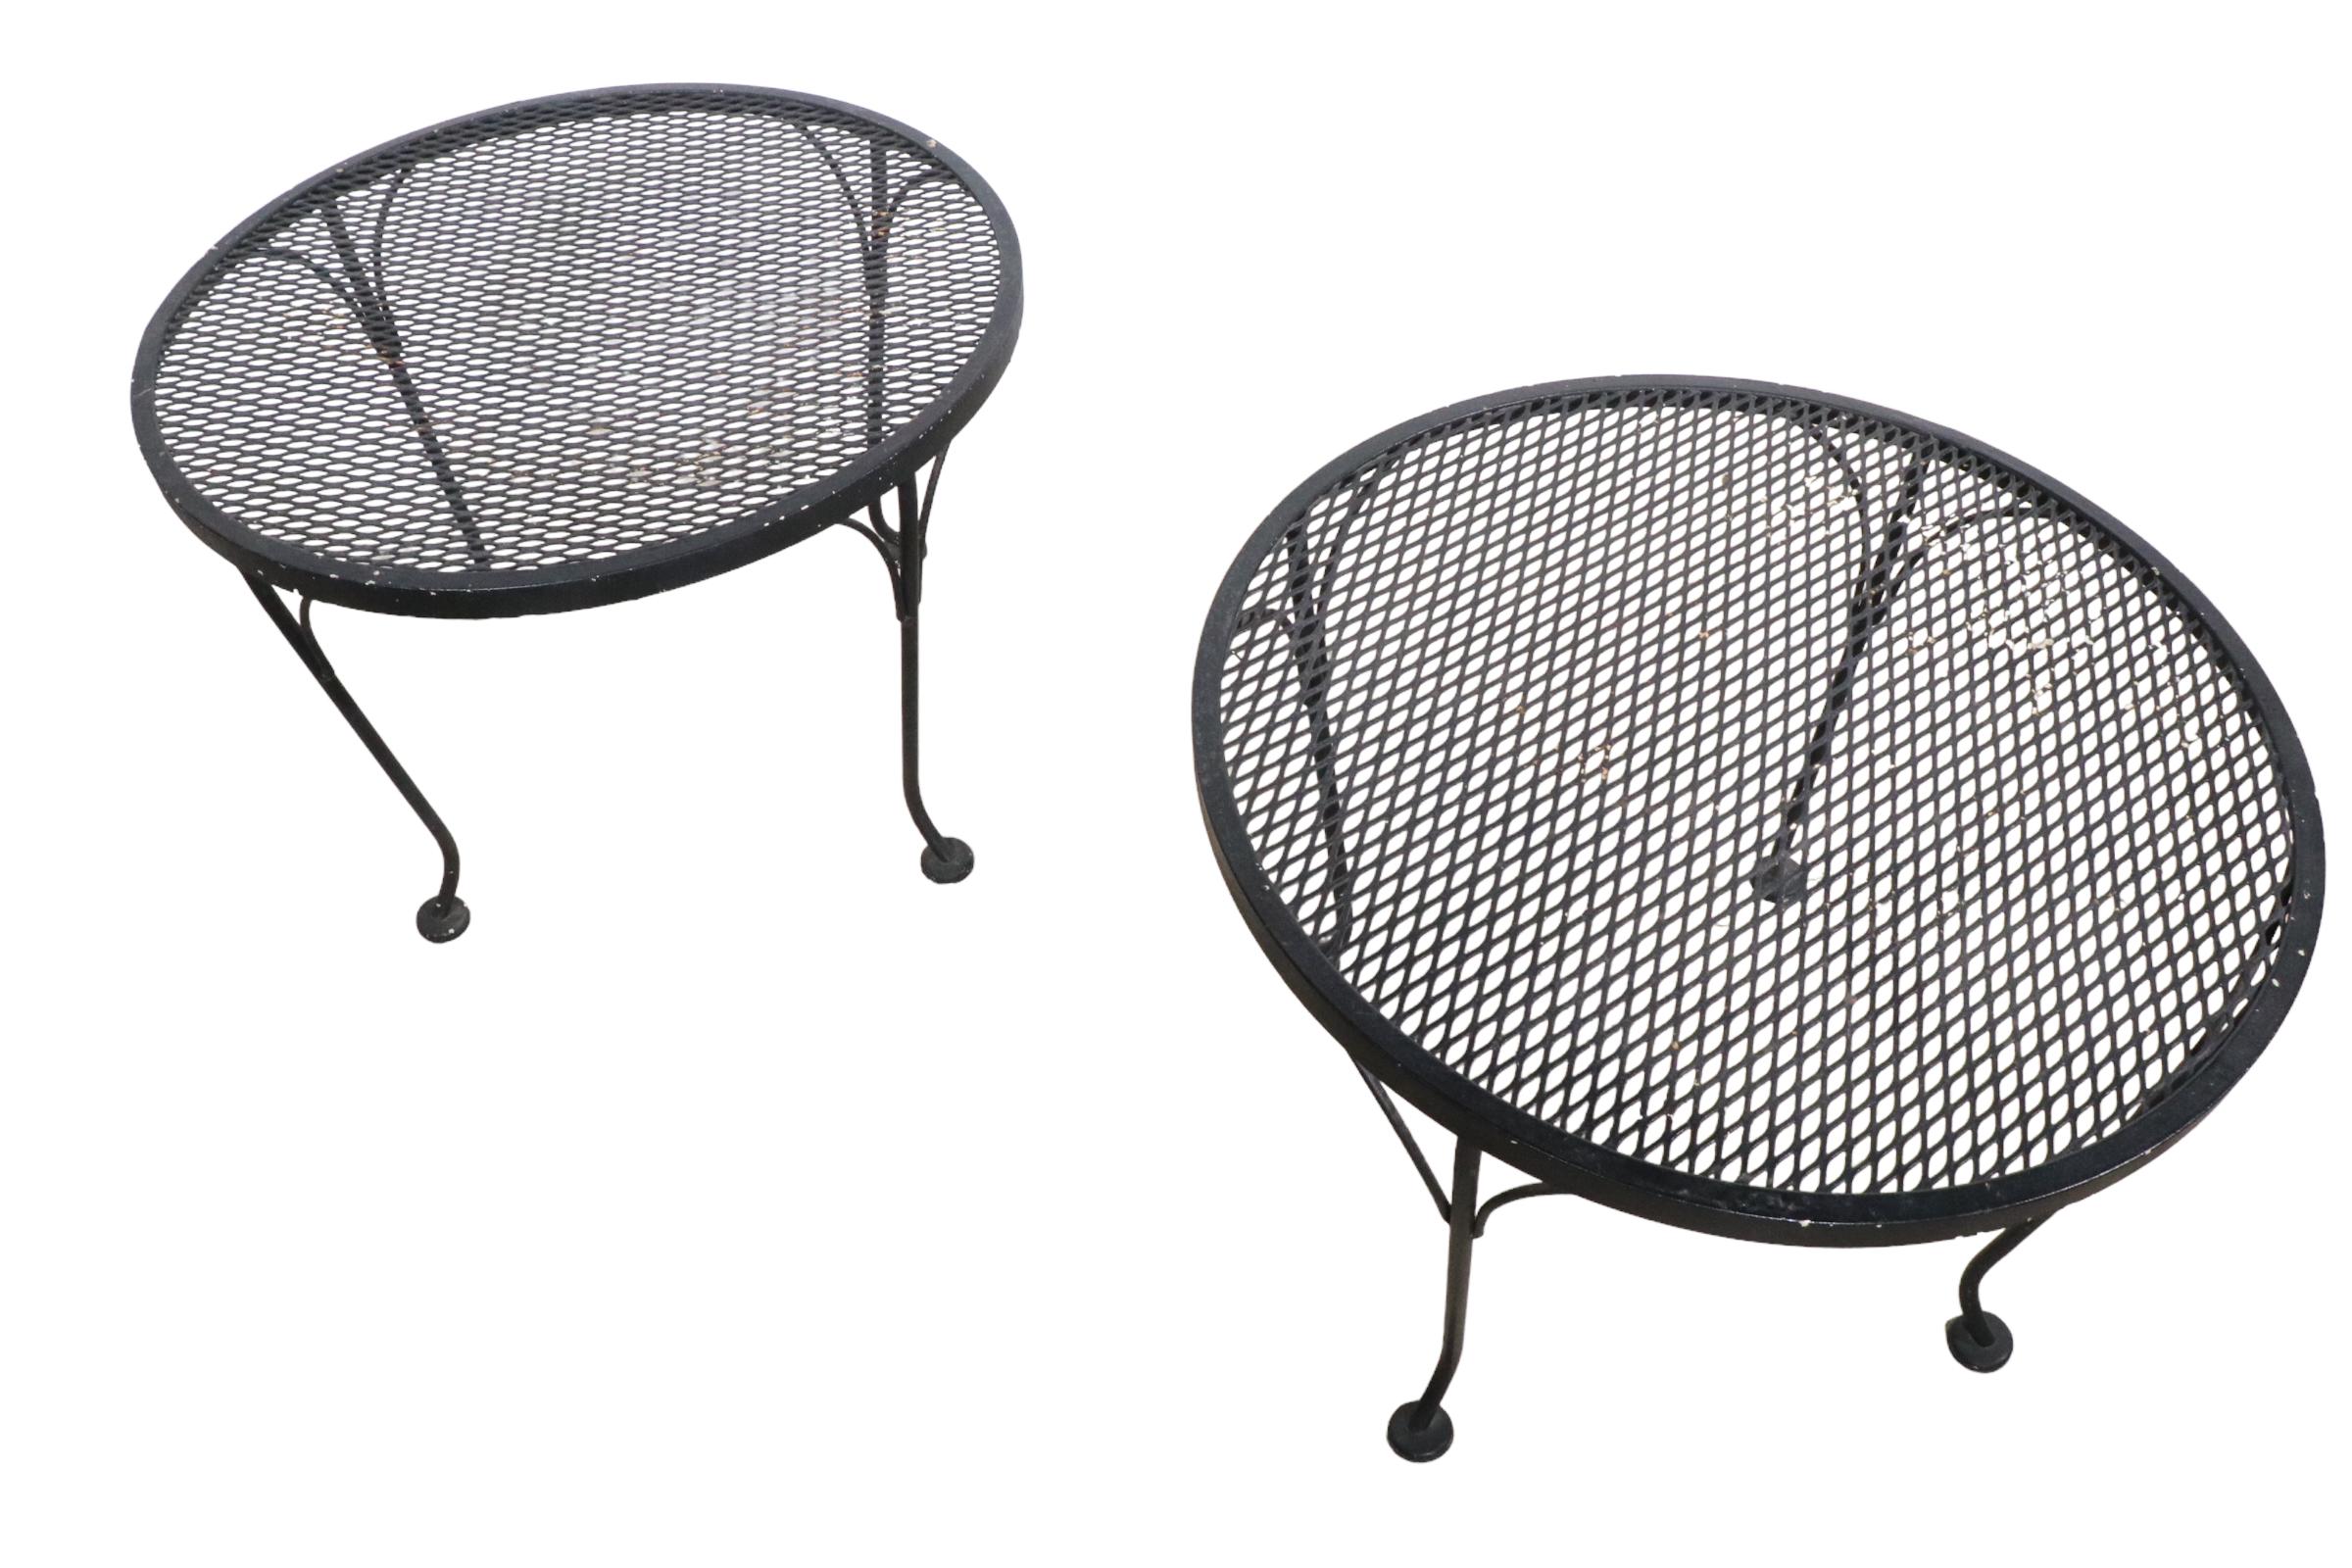 20th Century Wrought Iron and Metal Mesh Garden Patio Poolside Side Tables by Woodard